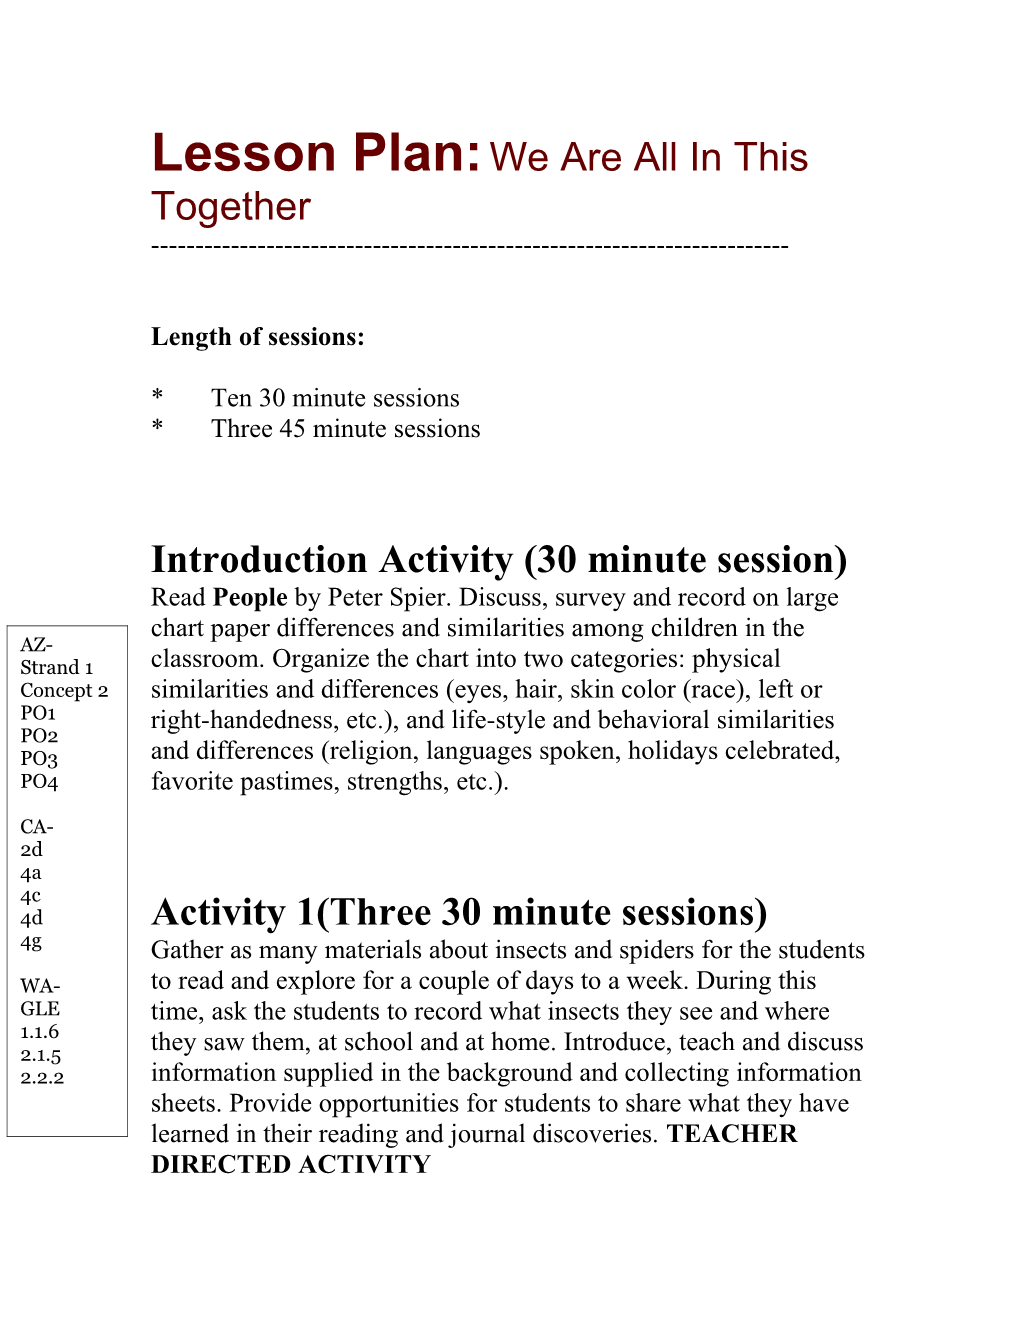 Lesson Plan: We Are All in This Together